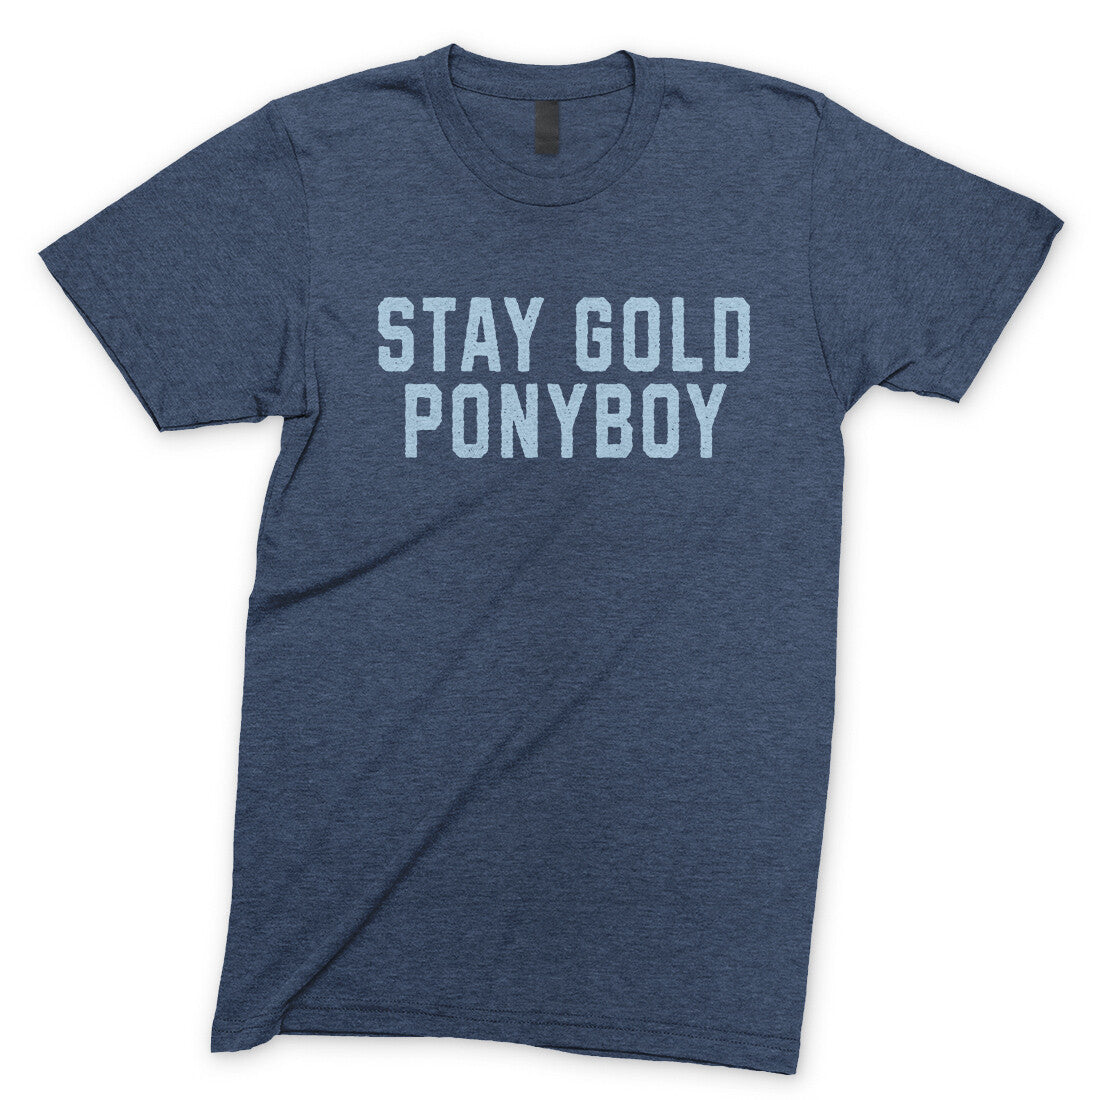 Stay Gold Ponyboy in Navy Heather Color